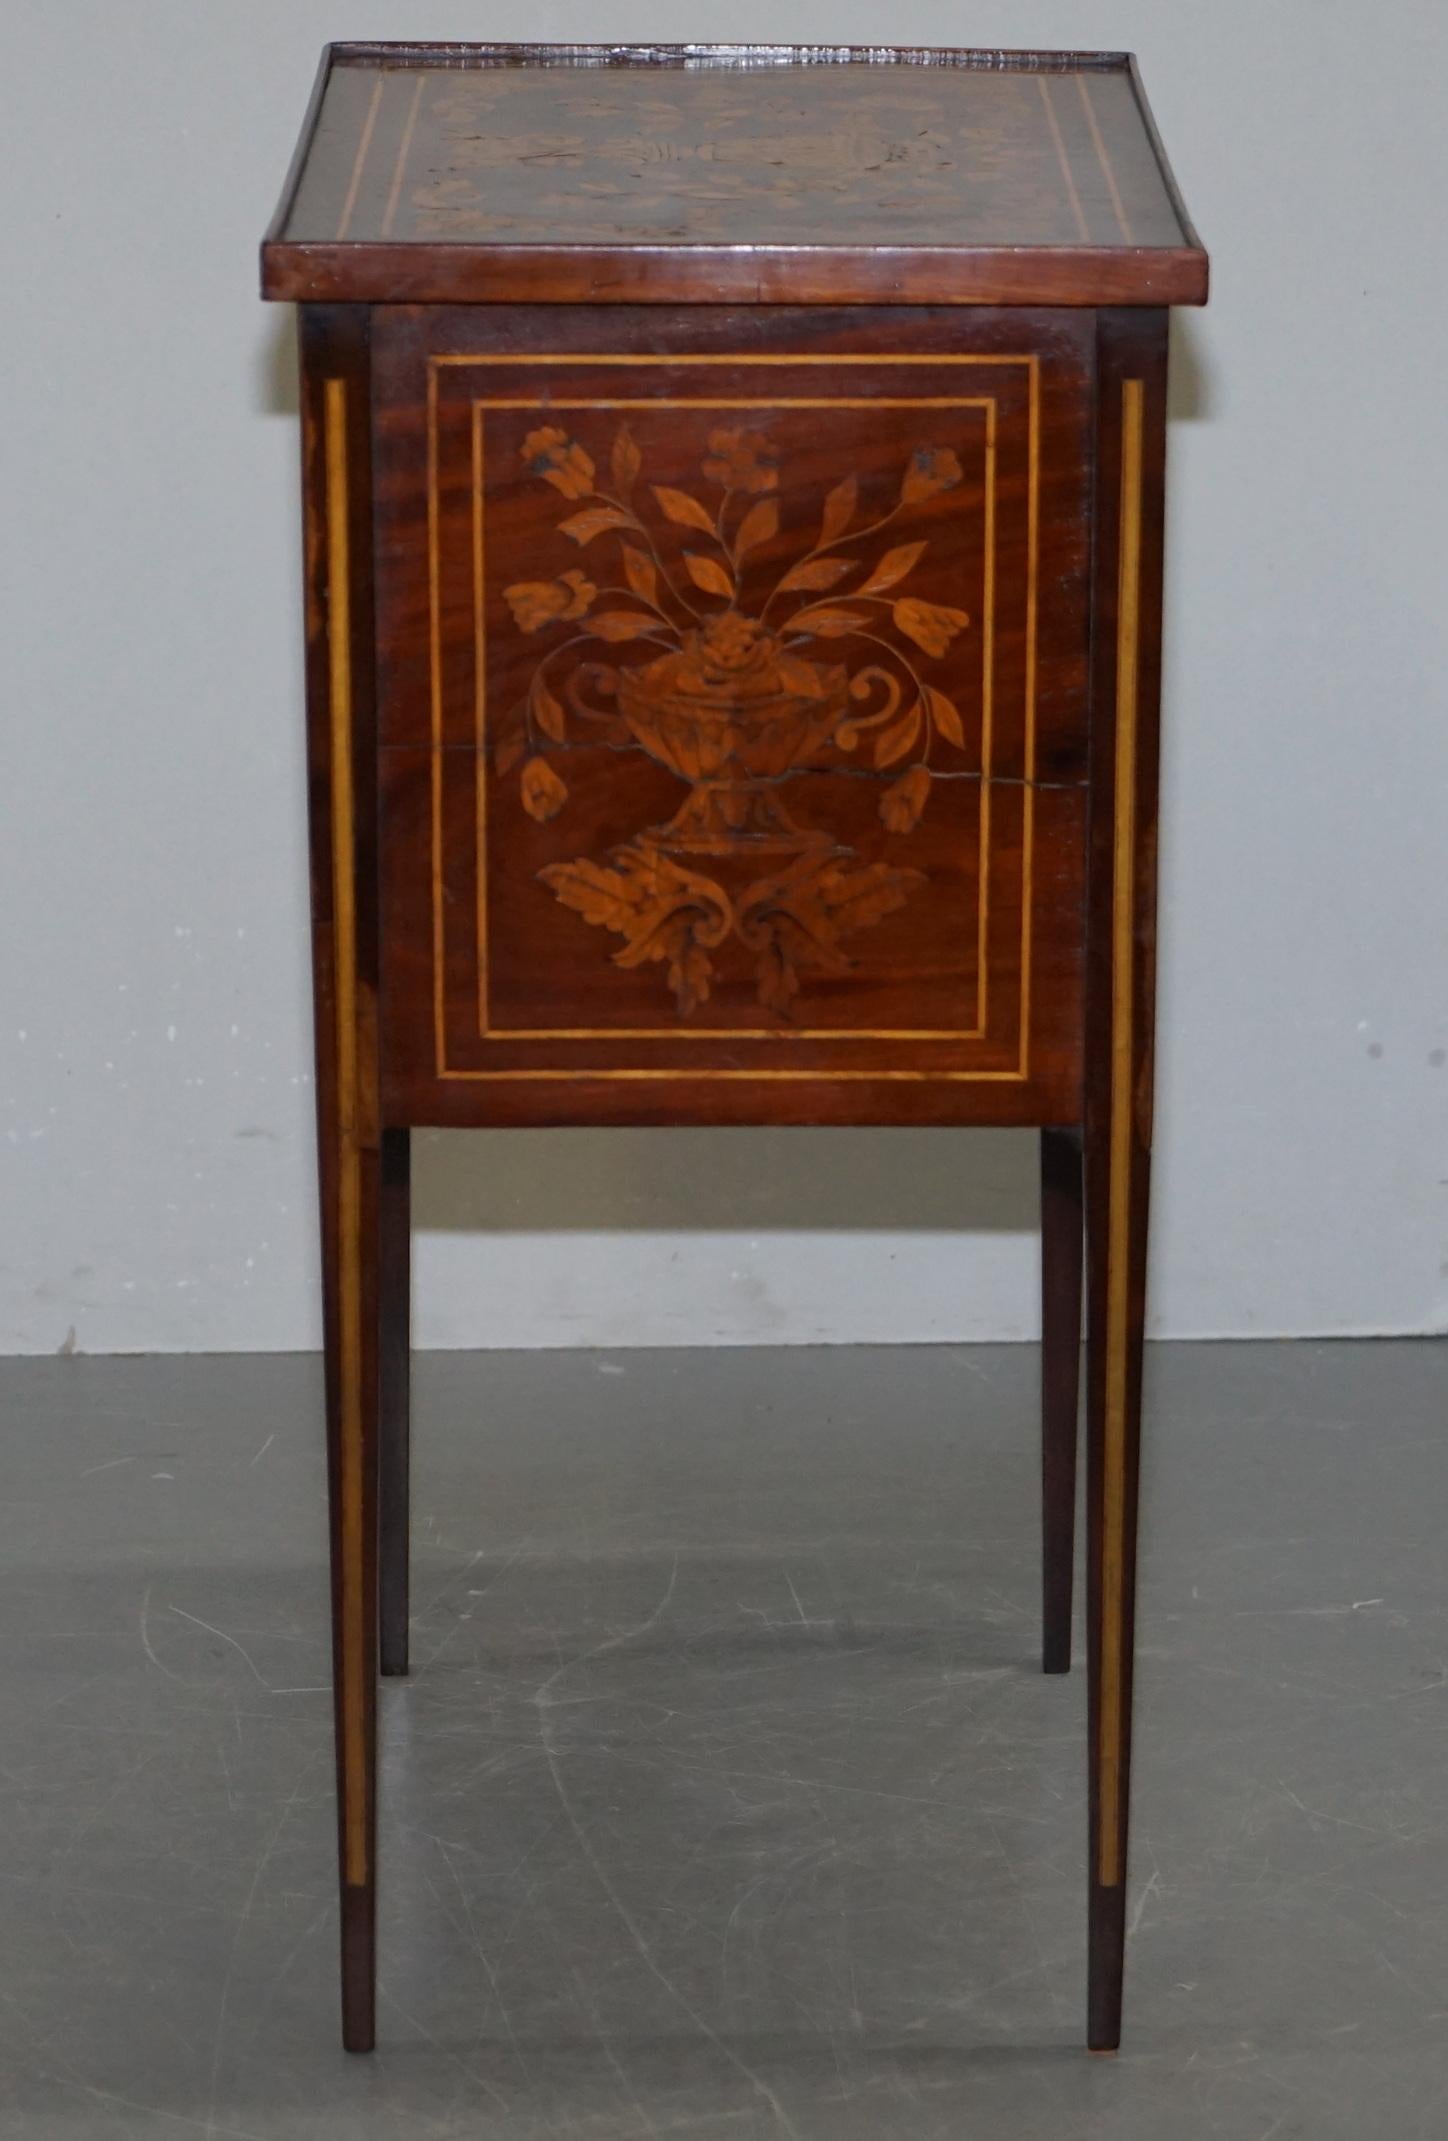 Rare 19th Century Dutch Marquetry Inlaid Side Table with Tambour Fronted Door For Sale 9